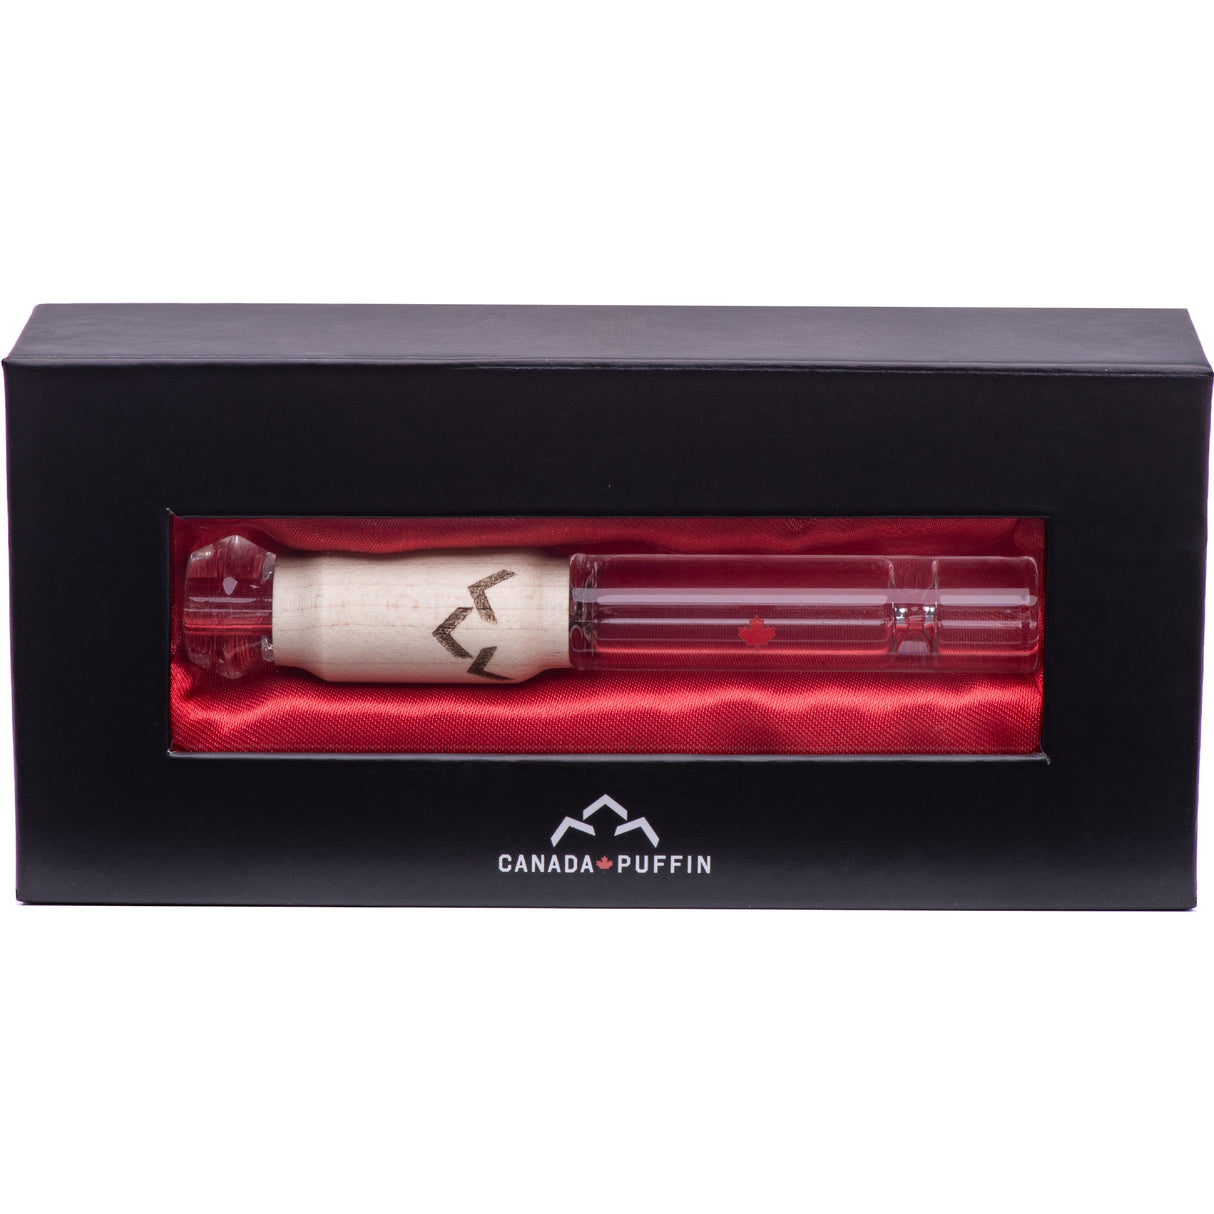 Canada Puffin Northern Lights Taster Pipe with Case, Front View on Seamless White